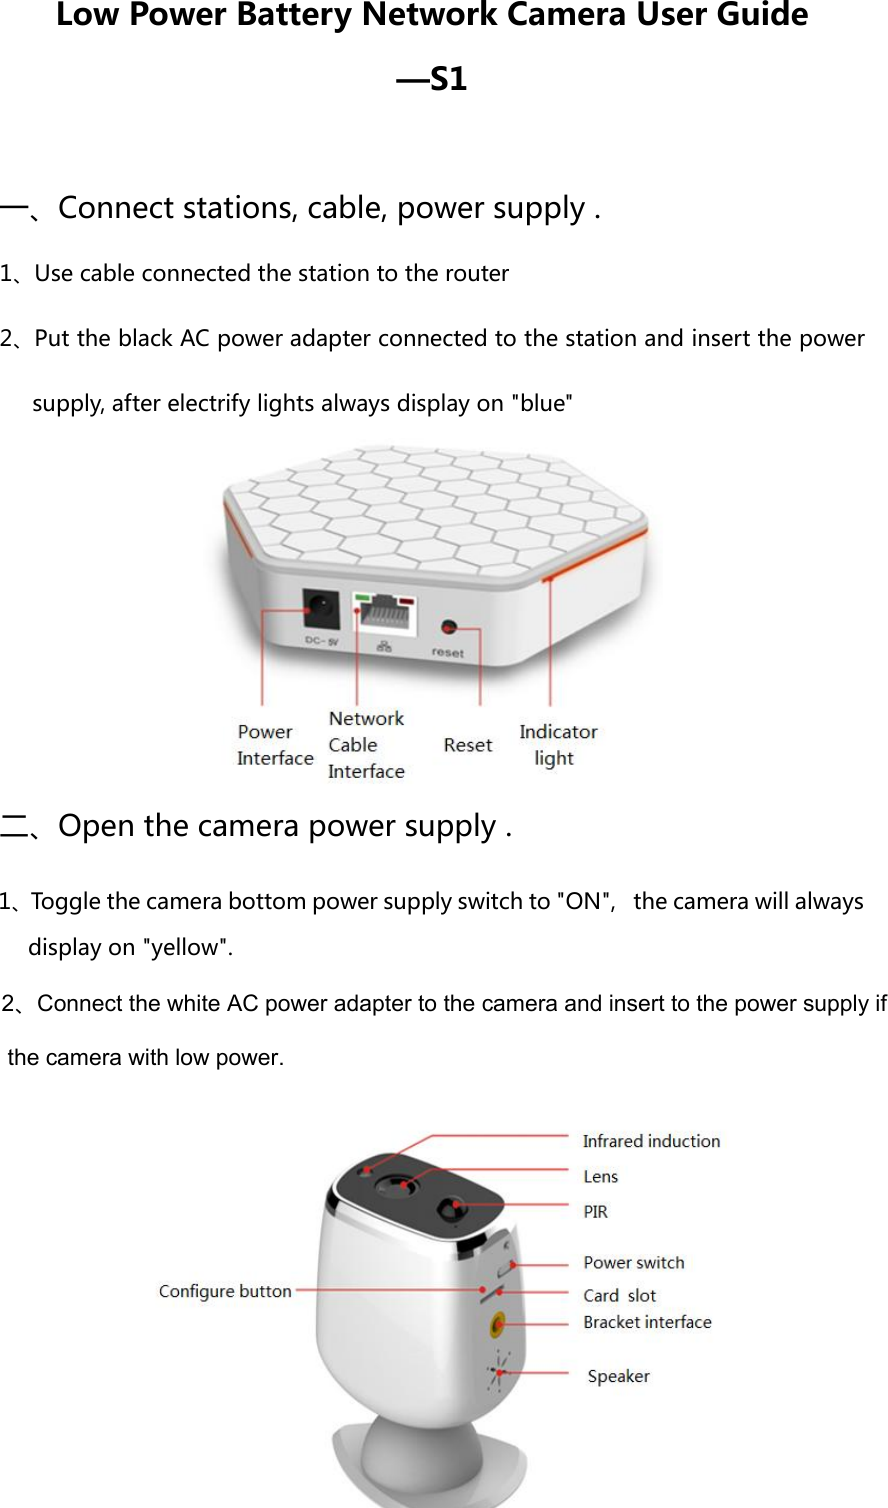 Low Power Battery Network Camera User Guide —S1 一、Connect stations, cable, power supply . 1、Use cable connected the station to the router 2、Put the black AC power adapter connected to the station and insert the power supply, after electrify lights always display on &quot;blue&quot; 二、Open the camera power supply . 2、Connect the white AC power adapter to the camera and insert to the power supply if  the camera with low power.display on &quot;yellow&quot;. 1、Toggle the camera bottom power supply switch to &quot;ON&quot;,   the camera will always 